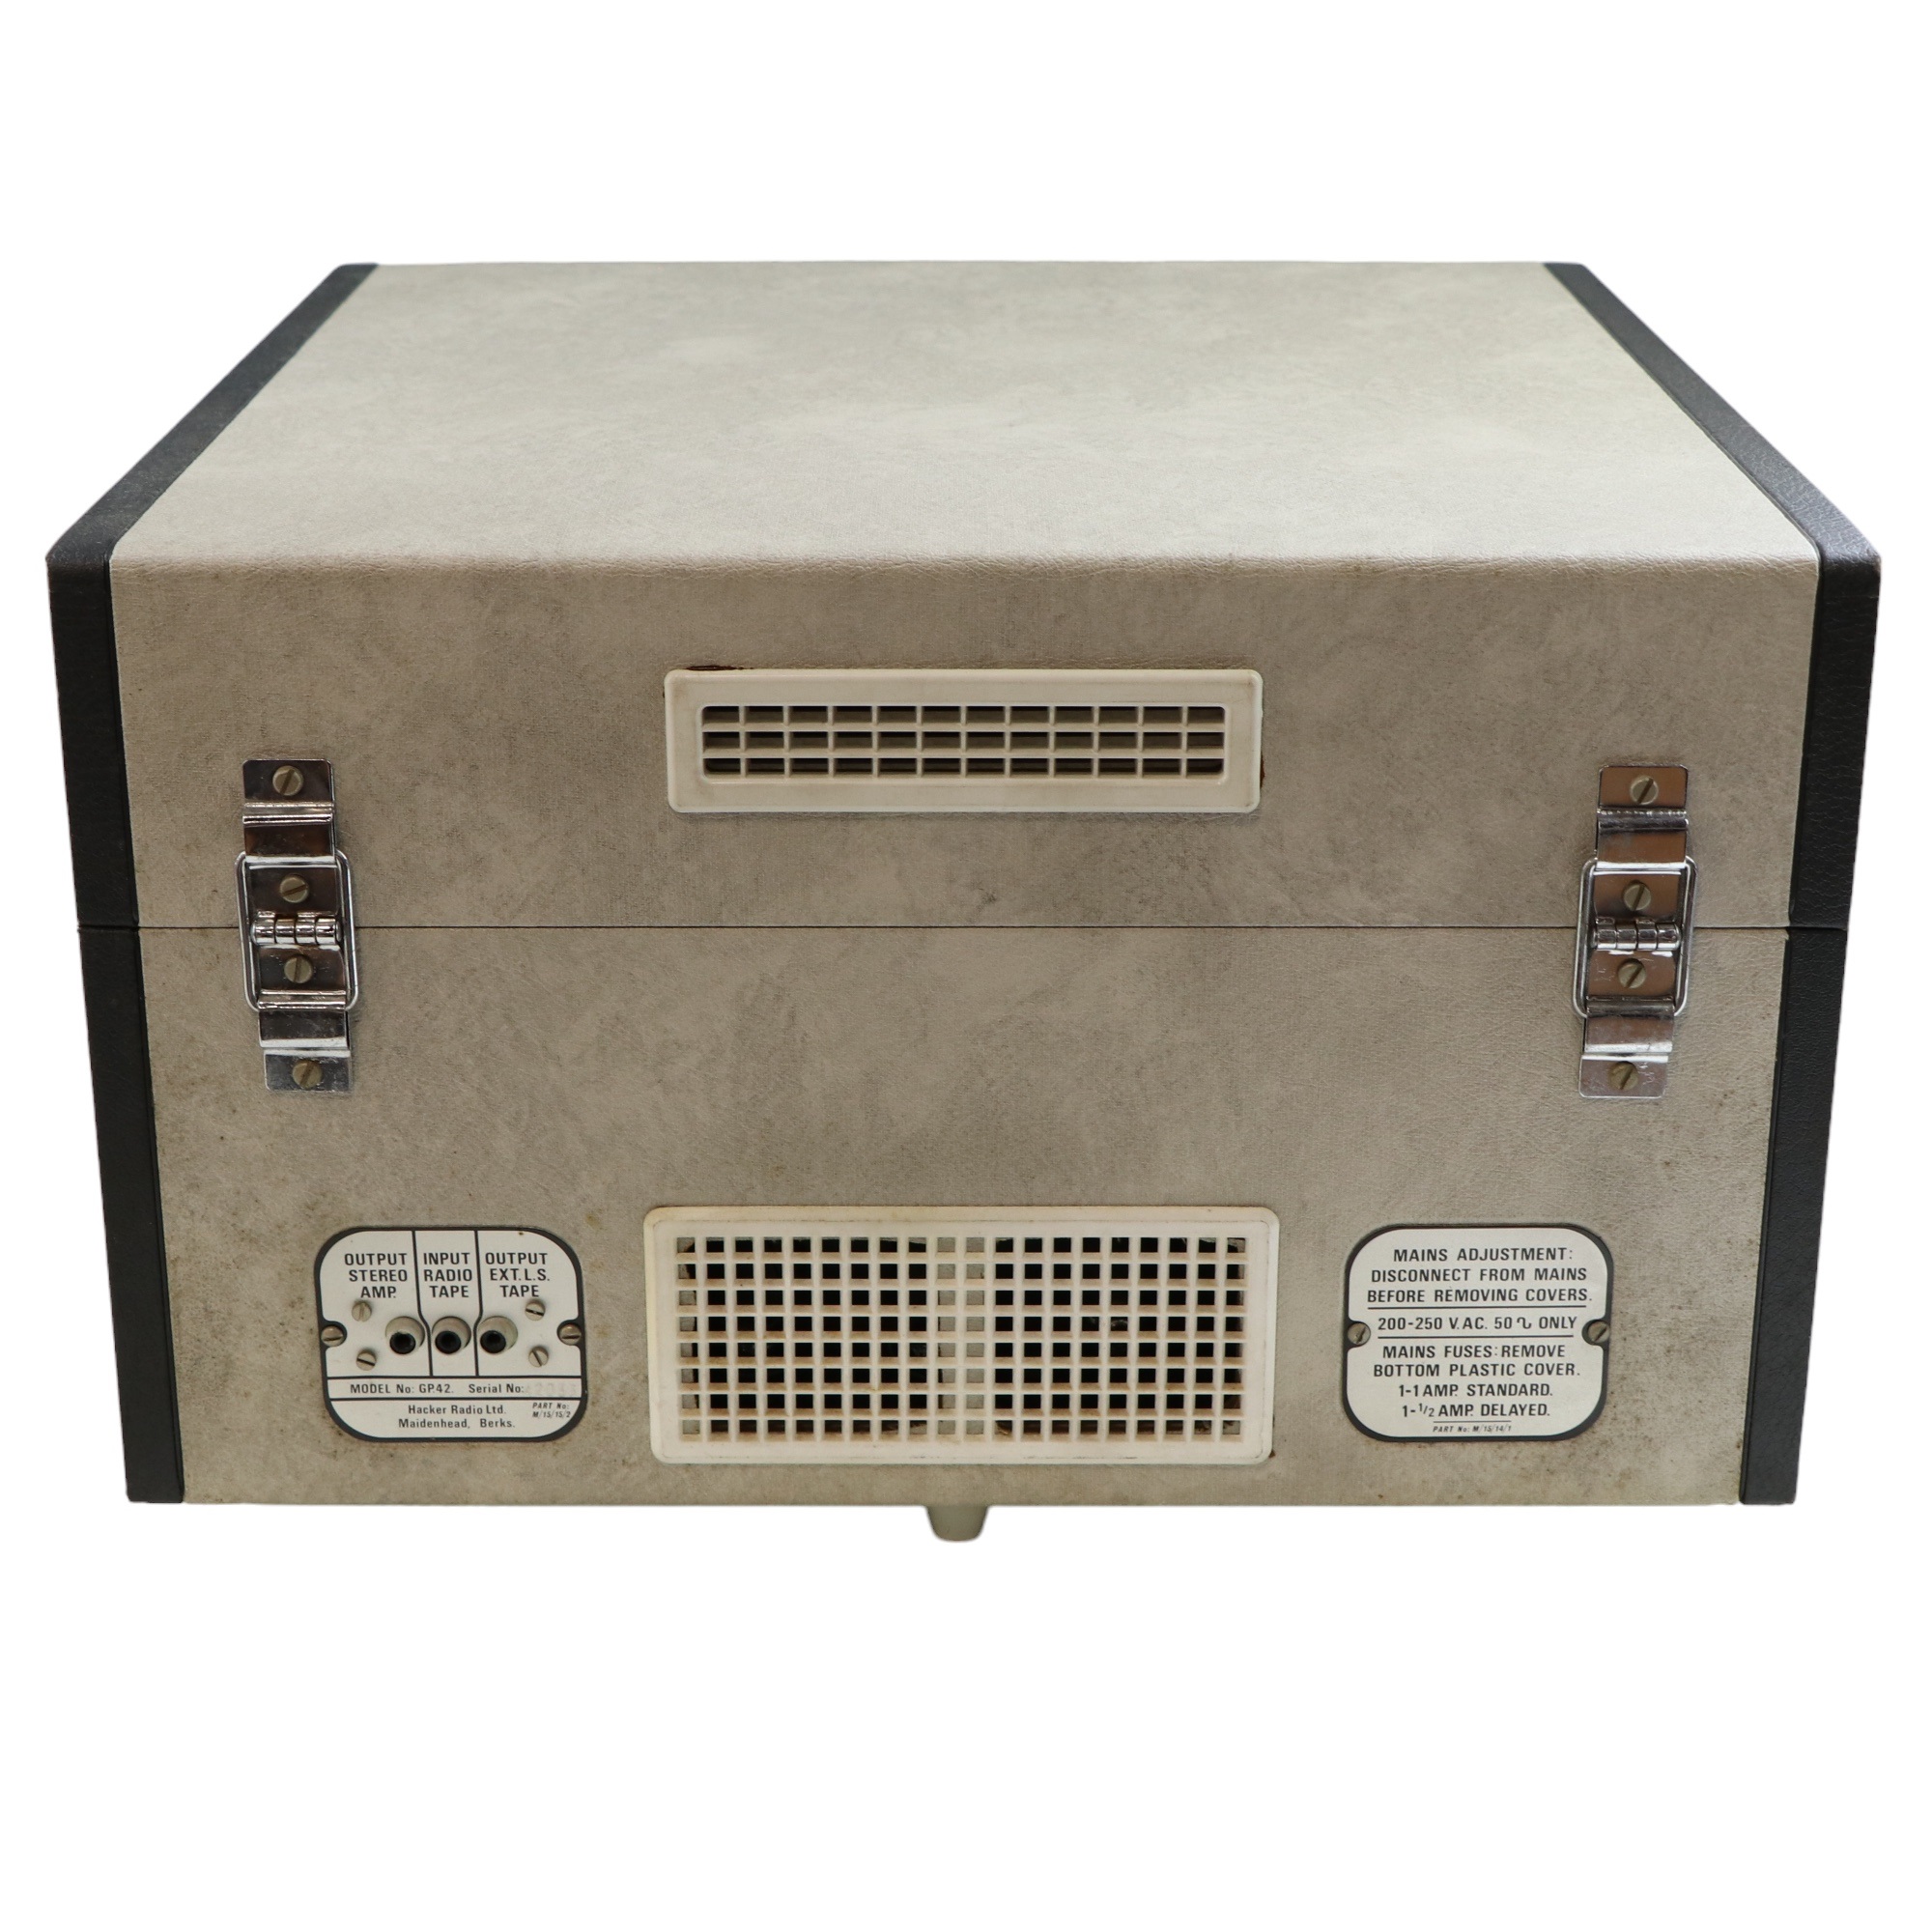 A 1960s Hacker record player, model no GP42 - Image 6 of 6